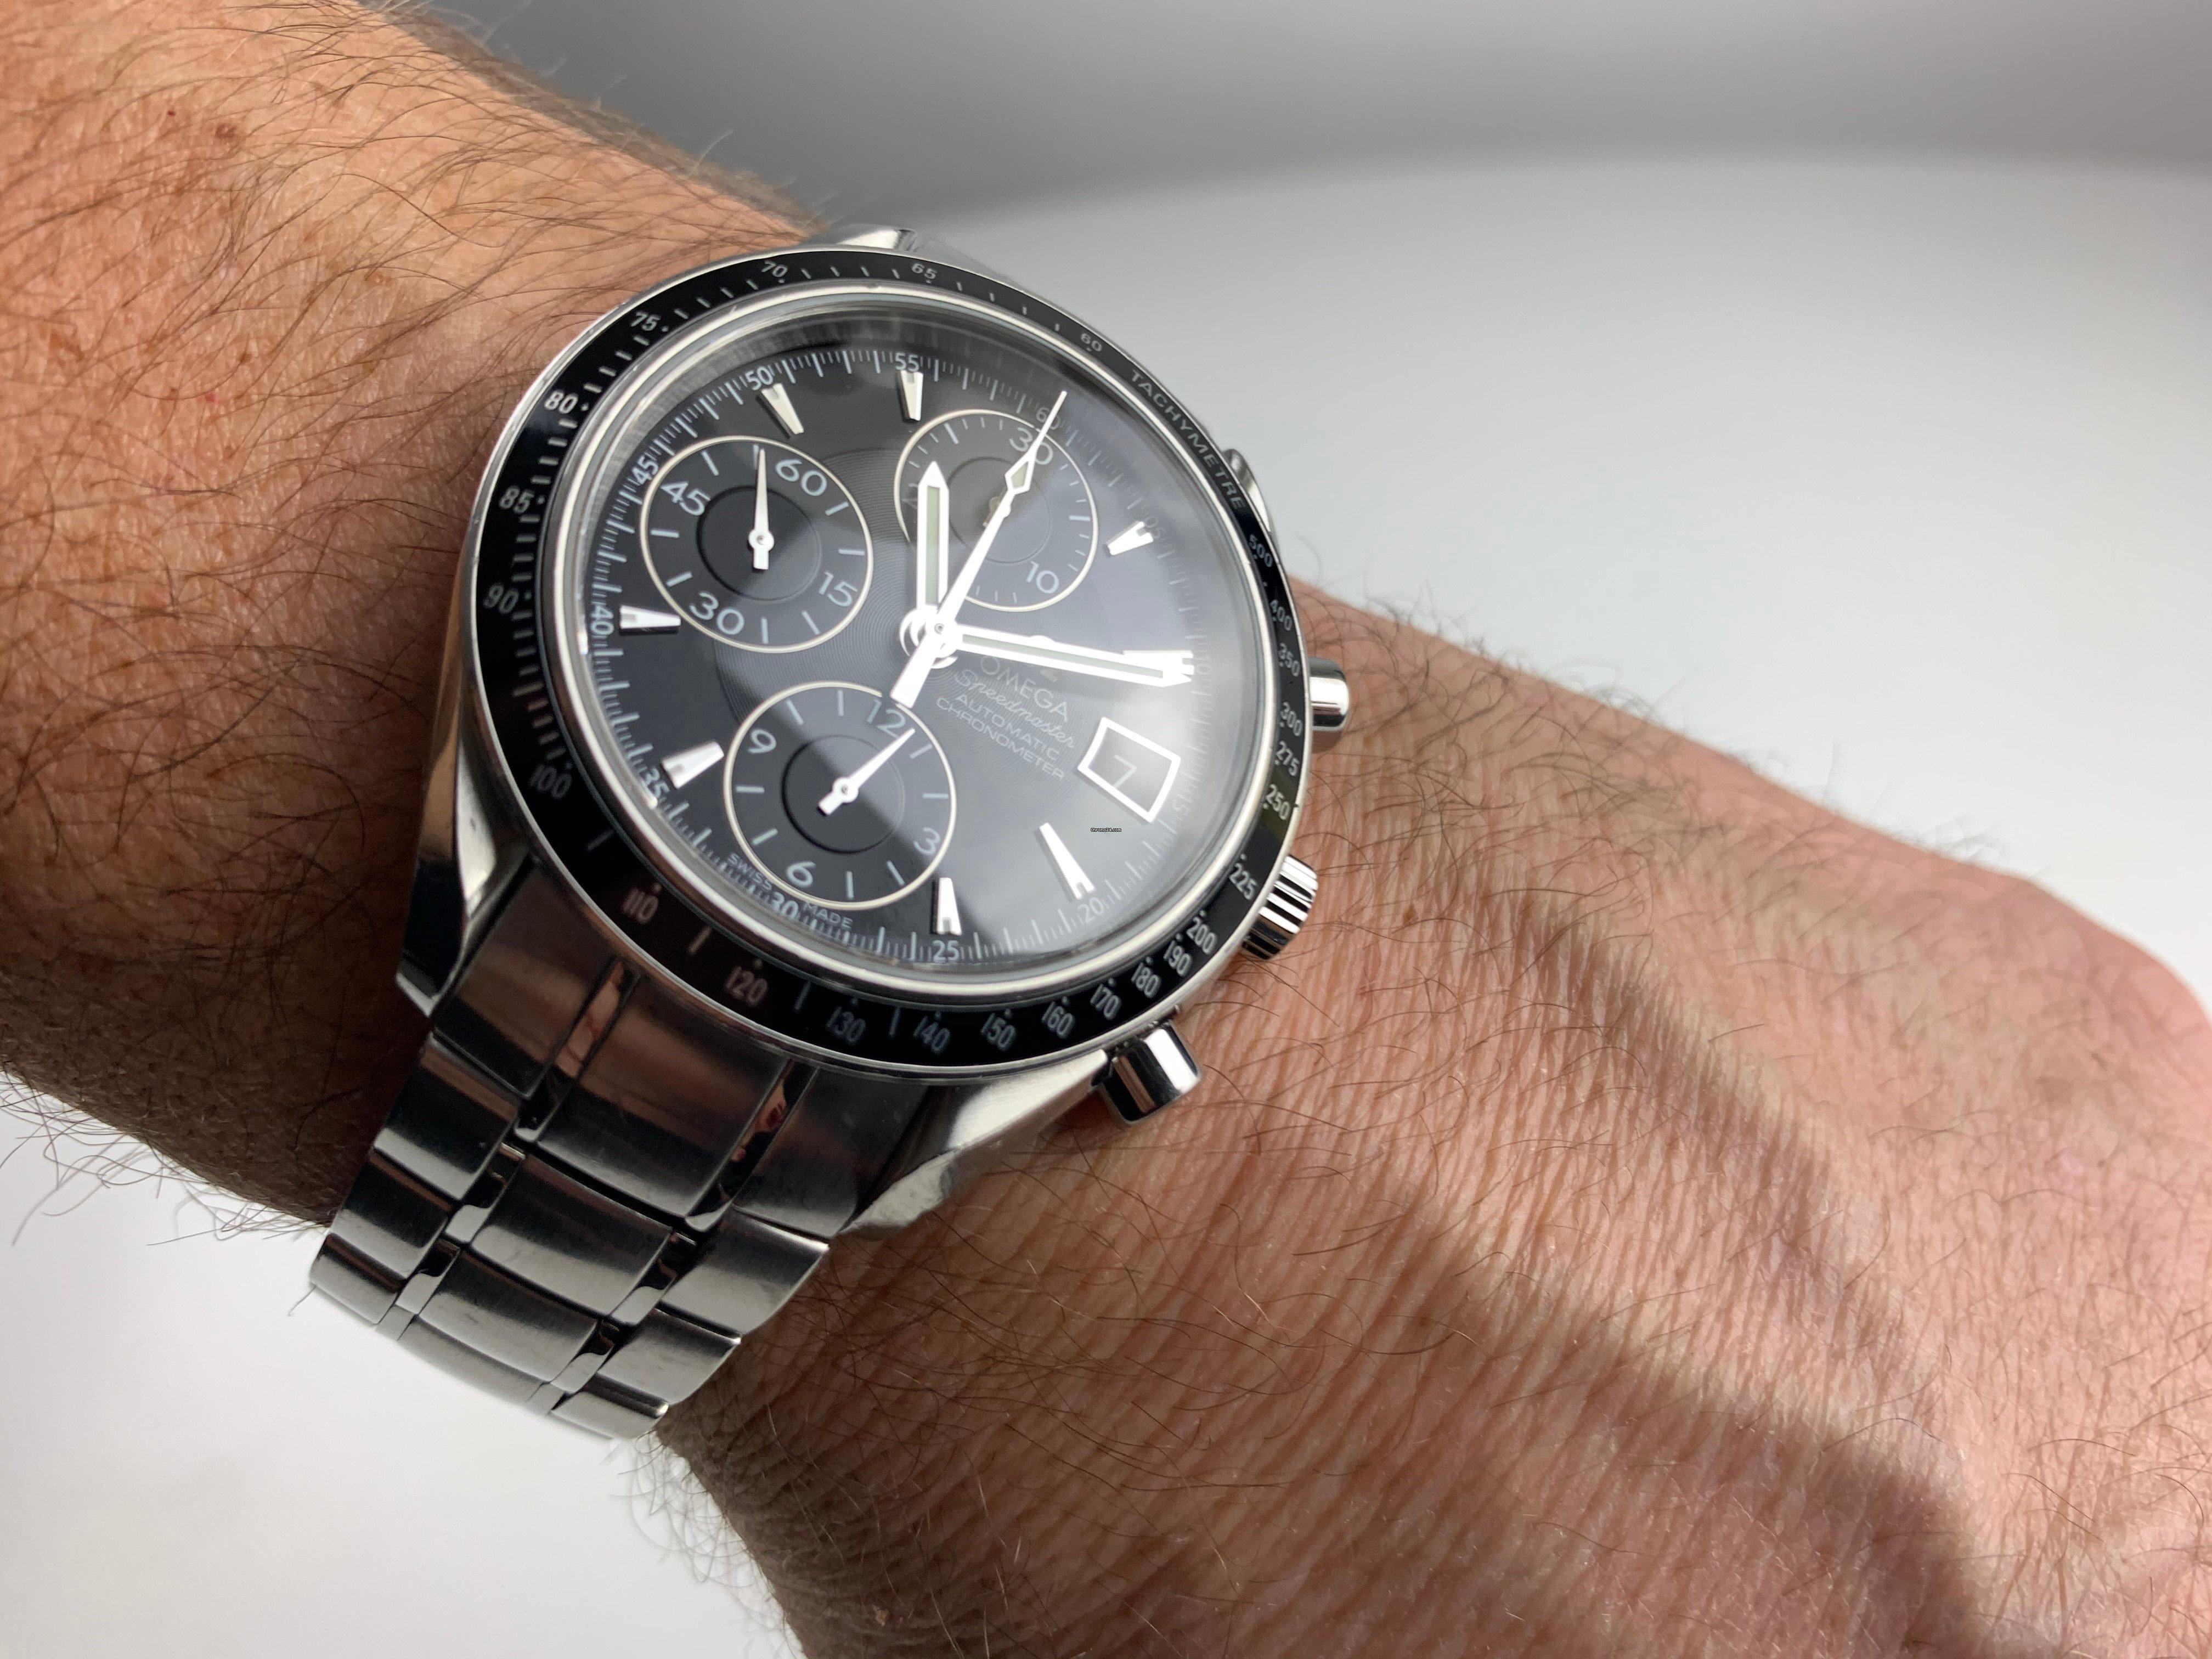 Omega Speedmaster 3510.50.00 Men's Watch.
39mm Stainless Steel case with a tachymeter bezel.
Black dial with luminous hands and index hour markers.
Three chronograph sub dials with a small seconds sub dial, 30 minutes and 12 hours.
Stainless steel